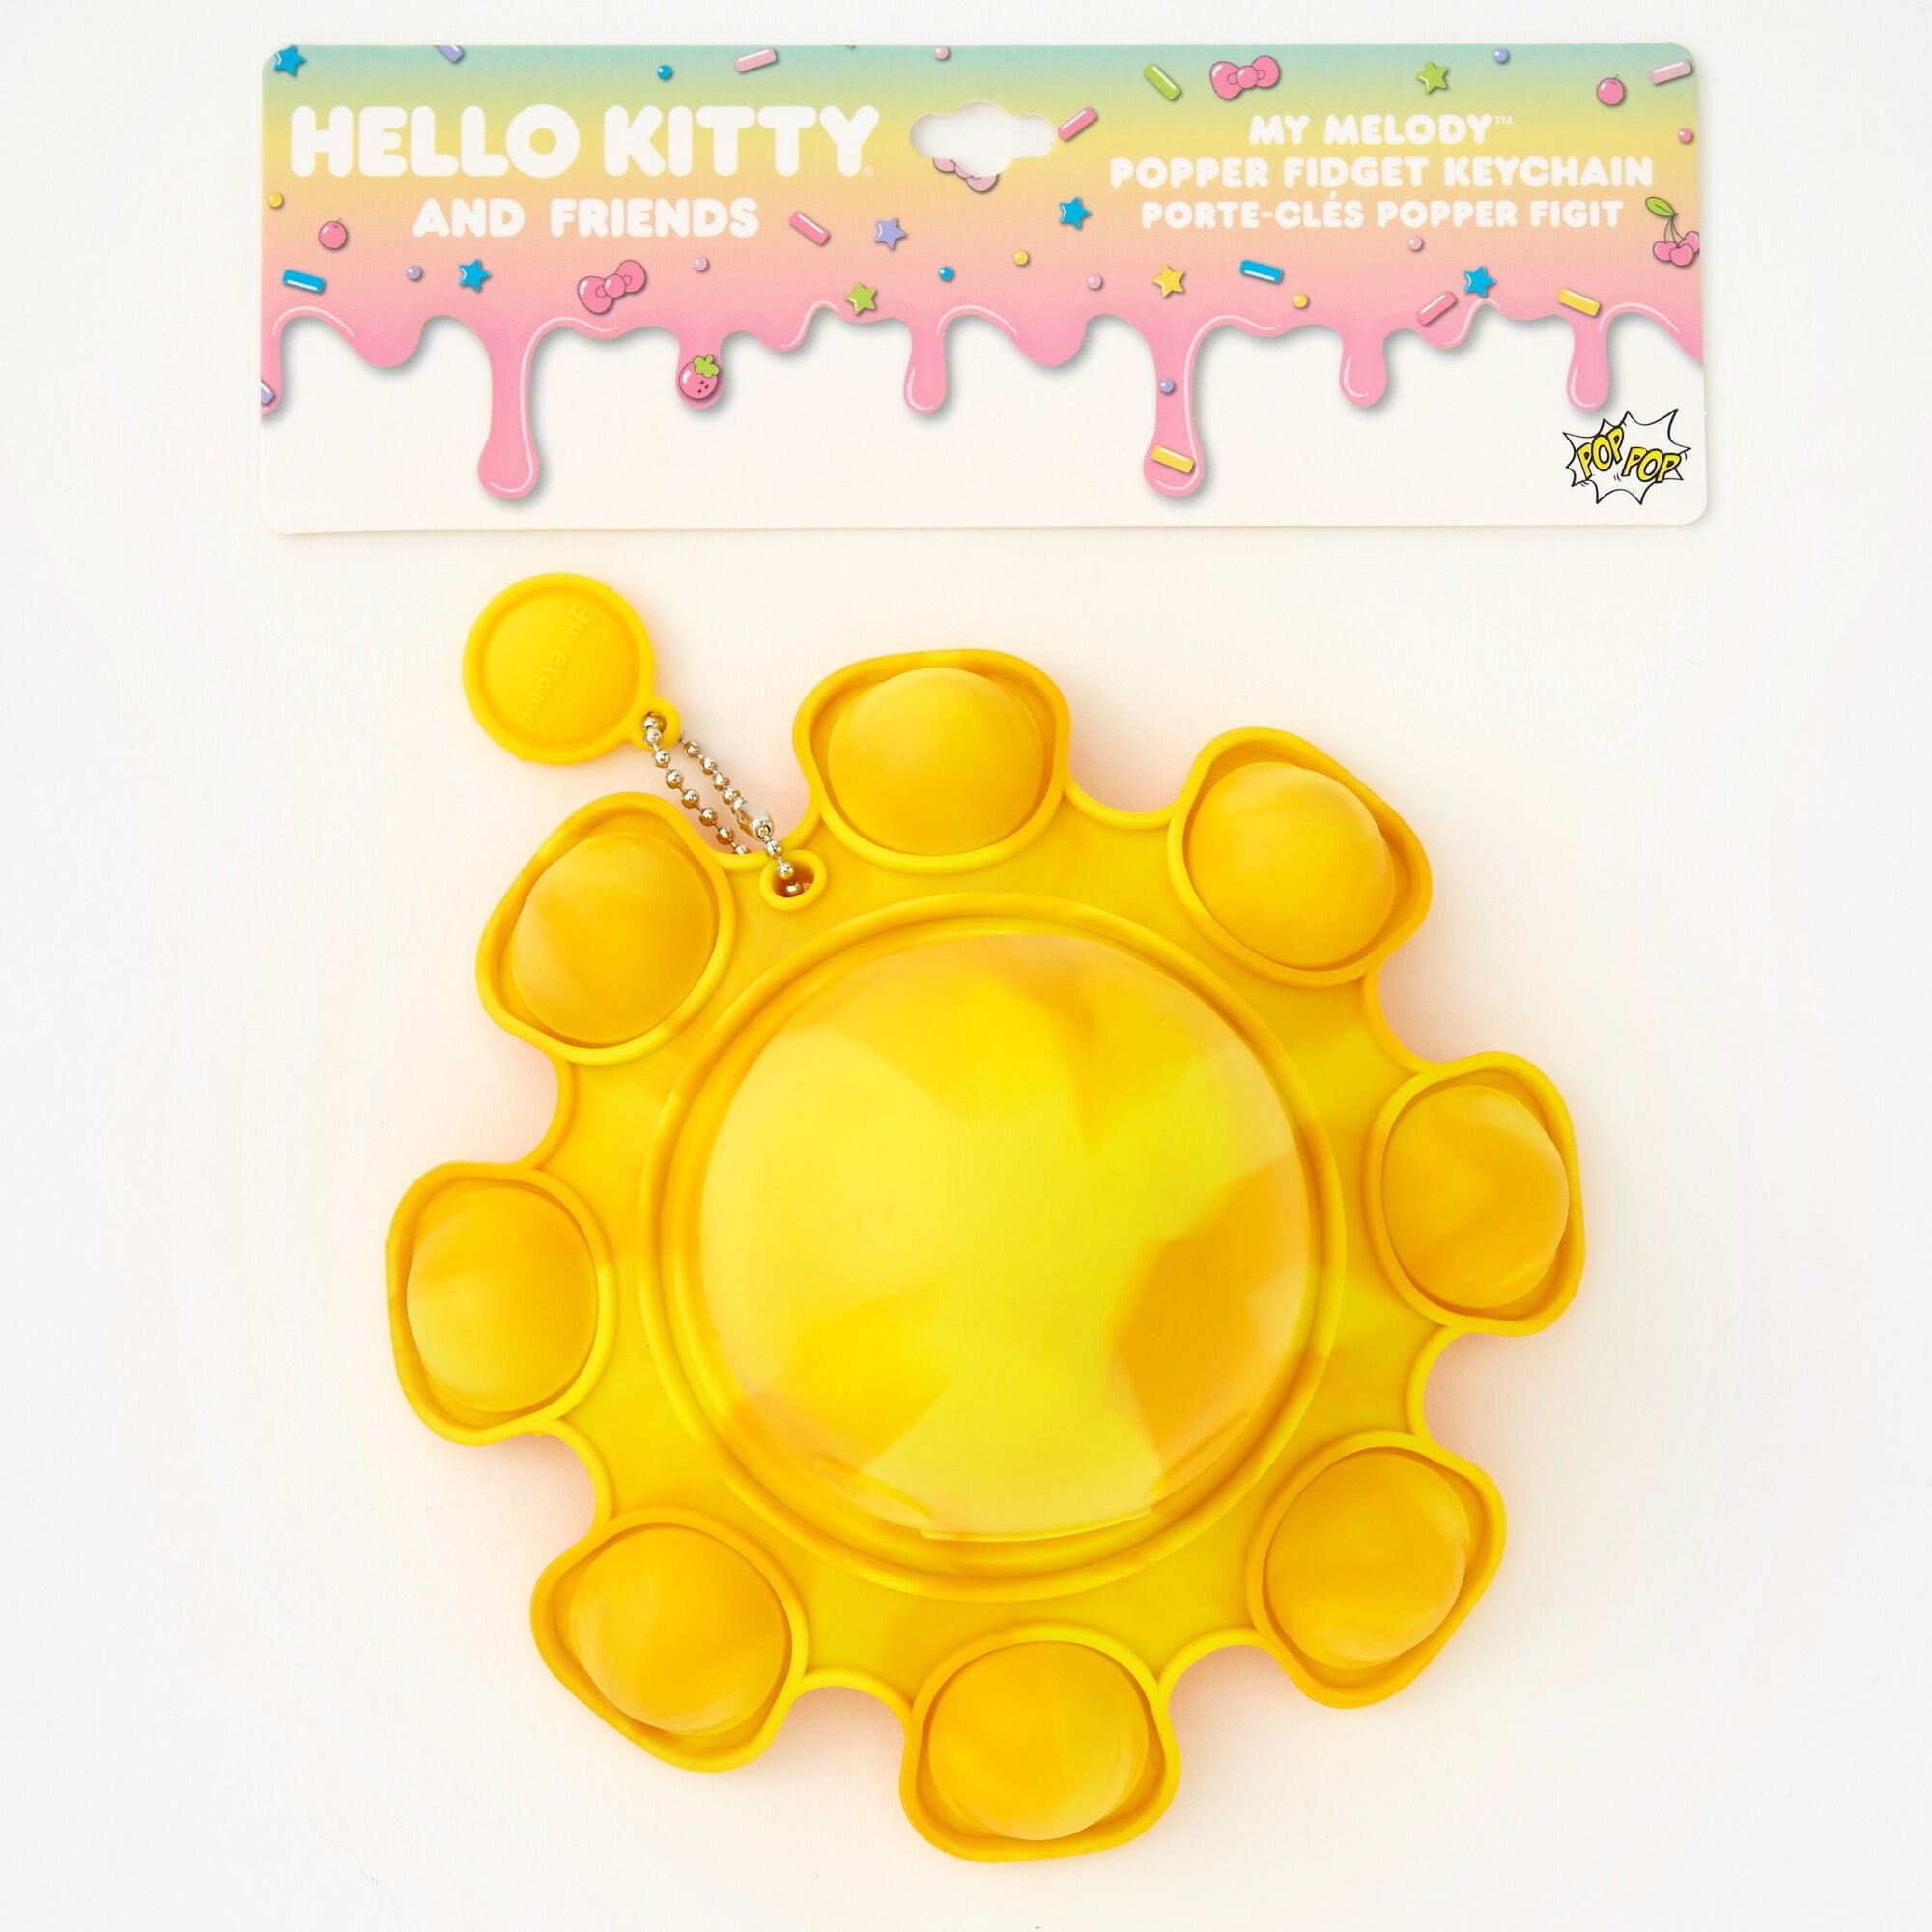 Claire's Hello Kitty® And Friends Gudetama™ Reversible OctopPop Popper Fidget Toy, Silicon Pl, Keychain